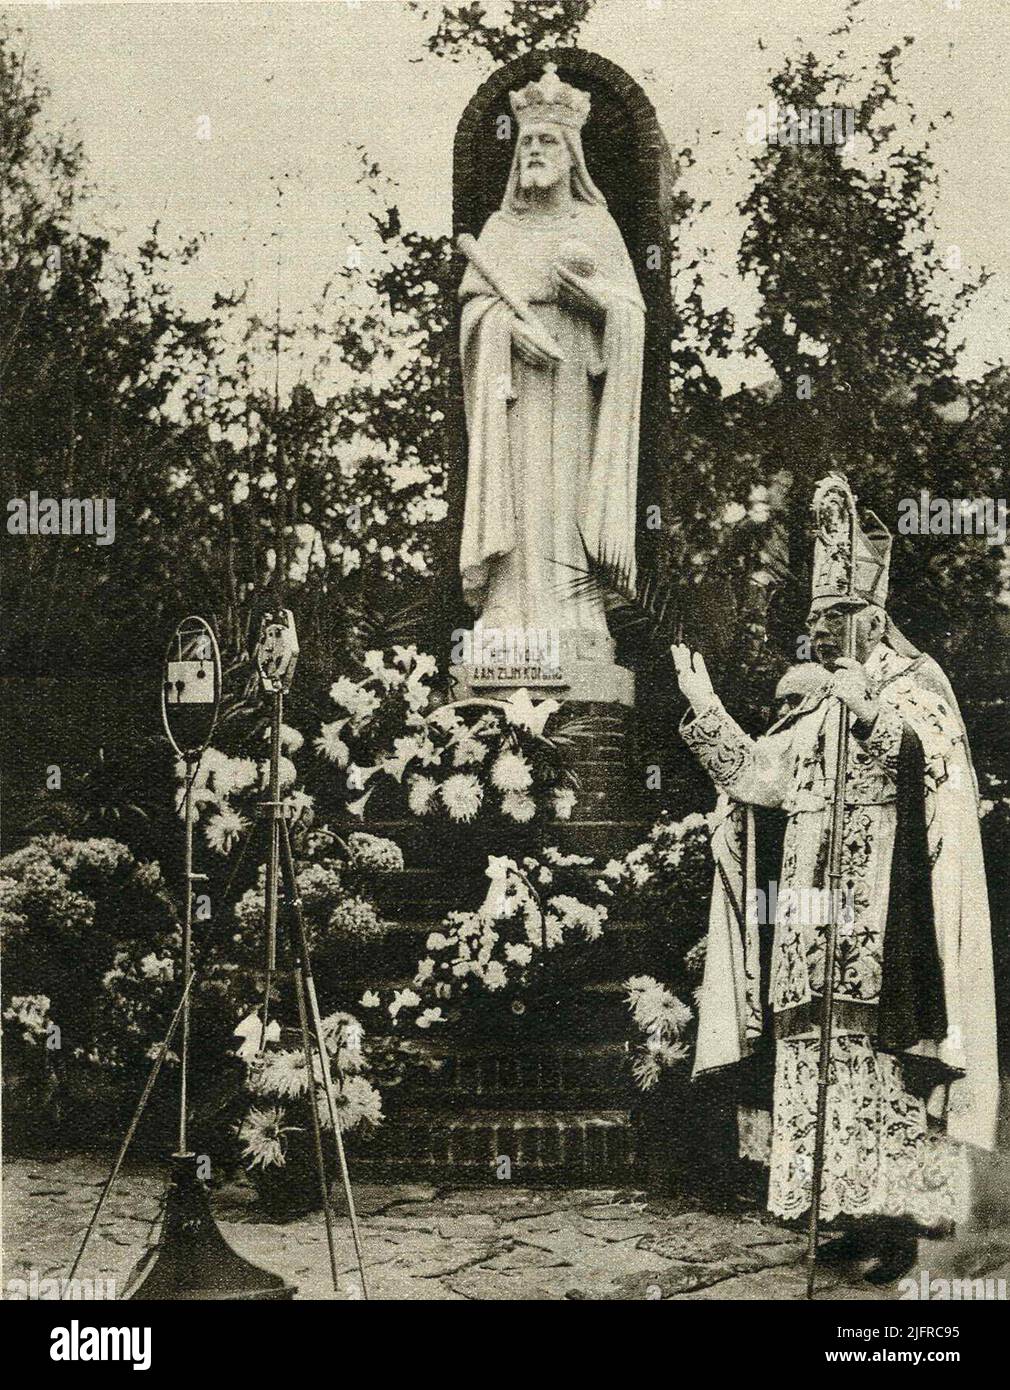 Intronization of the Christ Koning statue at the Koningsgaard monastery by Mgr. A.F. Diepen. The consecration was attended by participants in the tribute tour of men by Christ Koning. The statue of the sculptor Egidius Ludovicus Everaerts (28-01-1877 Antwerp-11-07-1949 Nijmegen) was created by gifts from the Nijmegen Catholic Burgerij. The names of those who contributed were bricked into a tube in the foot of the monument. Koningsgaard was the monastery of the Sister's company of the daughters of Jesus Sacred Heart from 1-4-1928 to 1983 Stock Photo